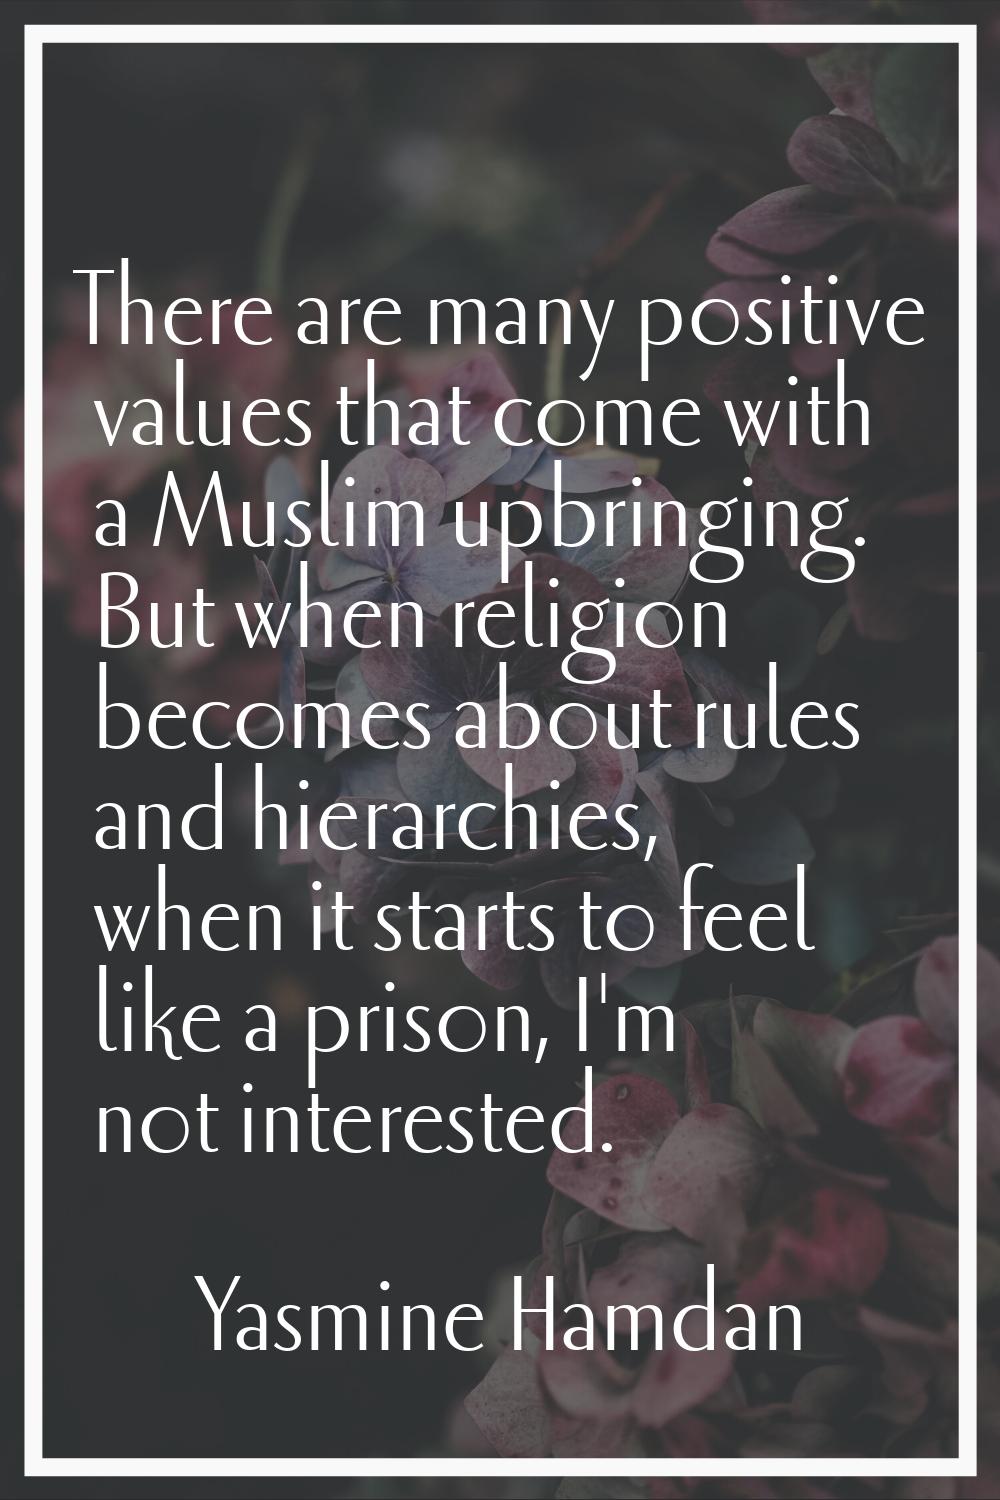 There are many positive values that come with a Muslim upbringing. But when religion becomes about 